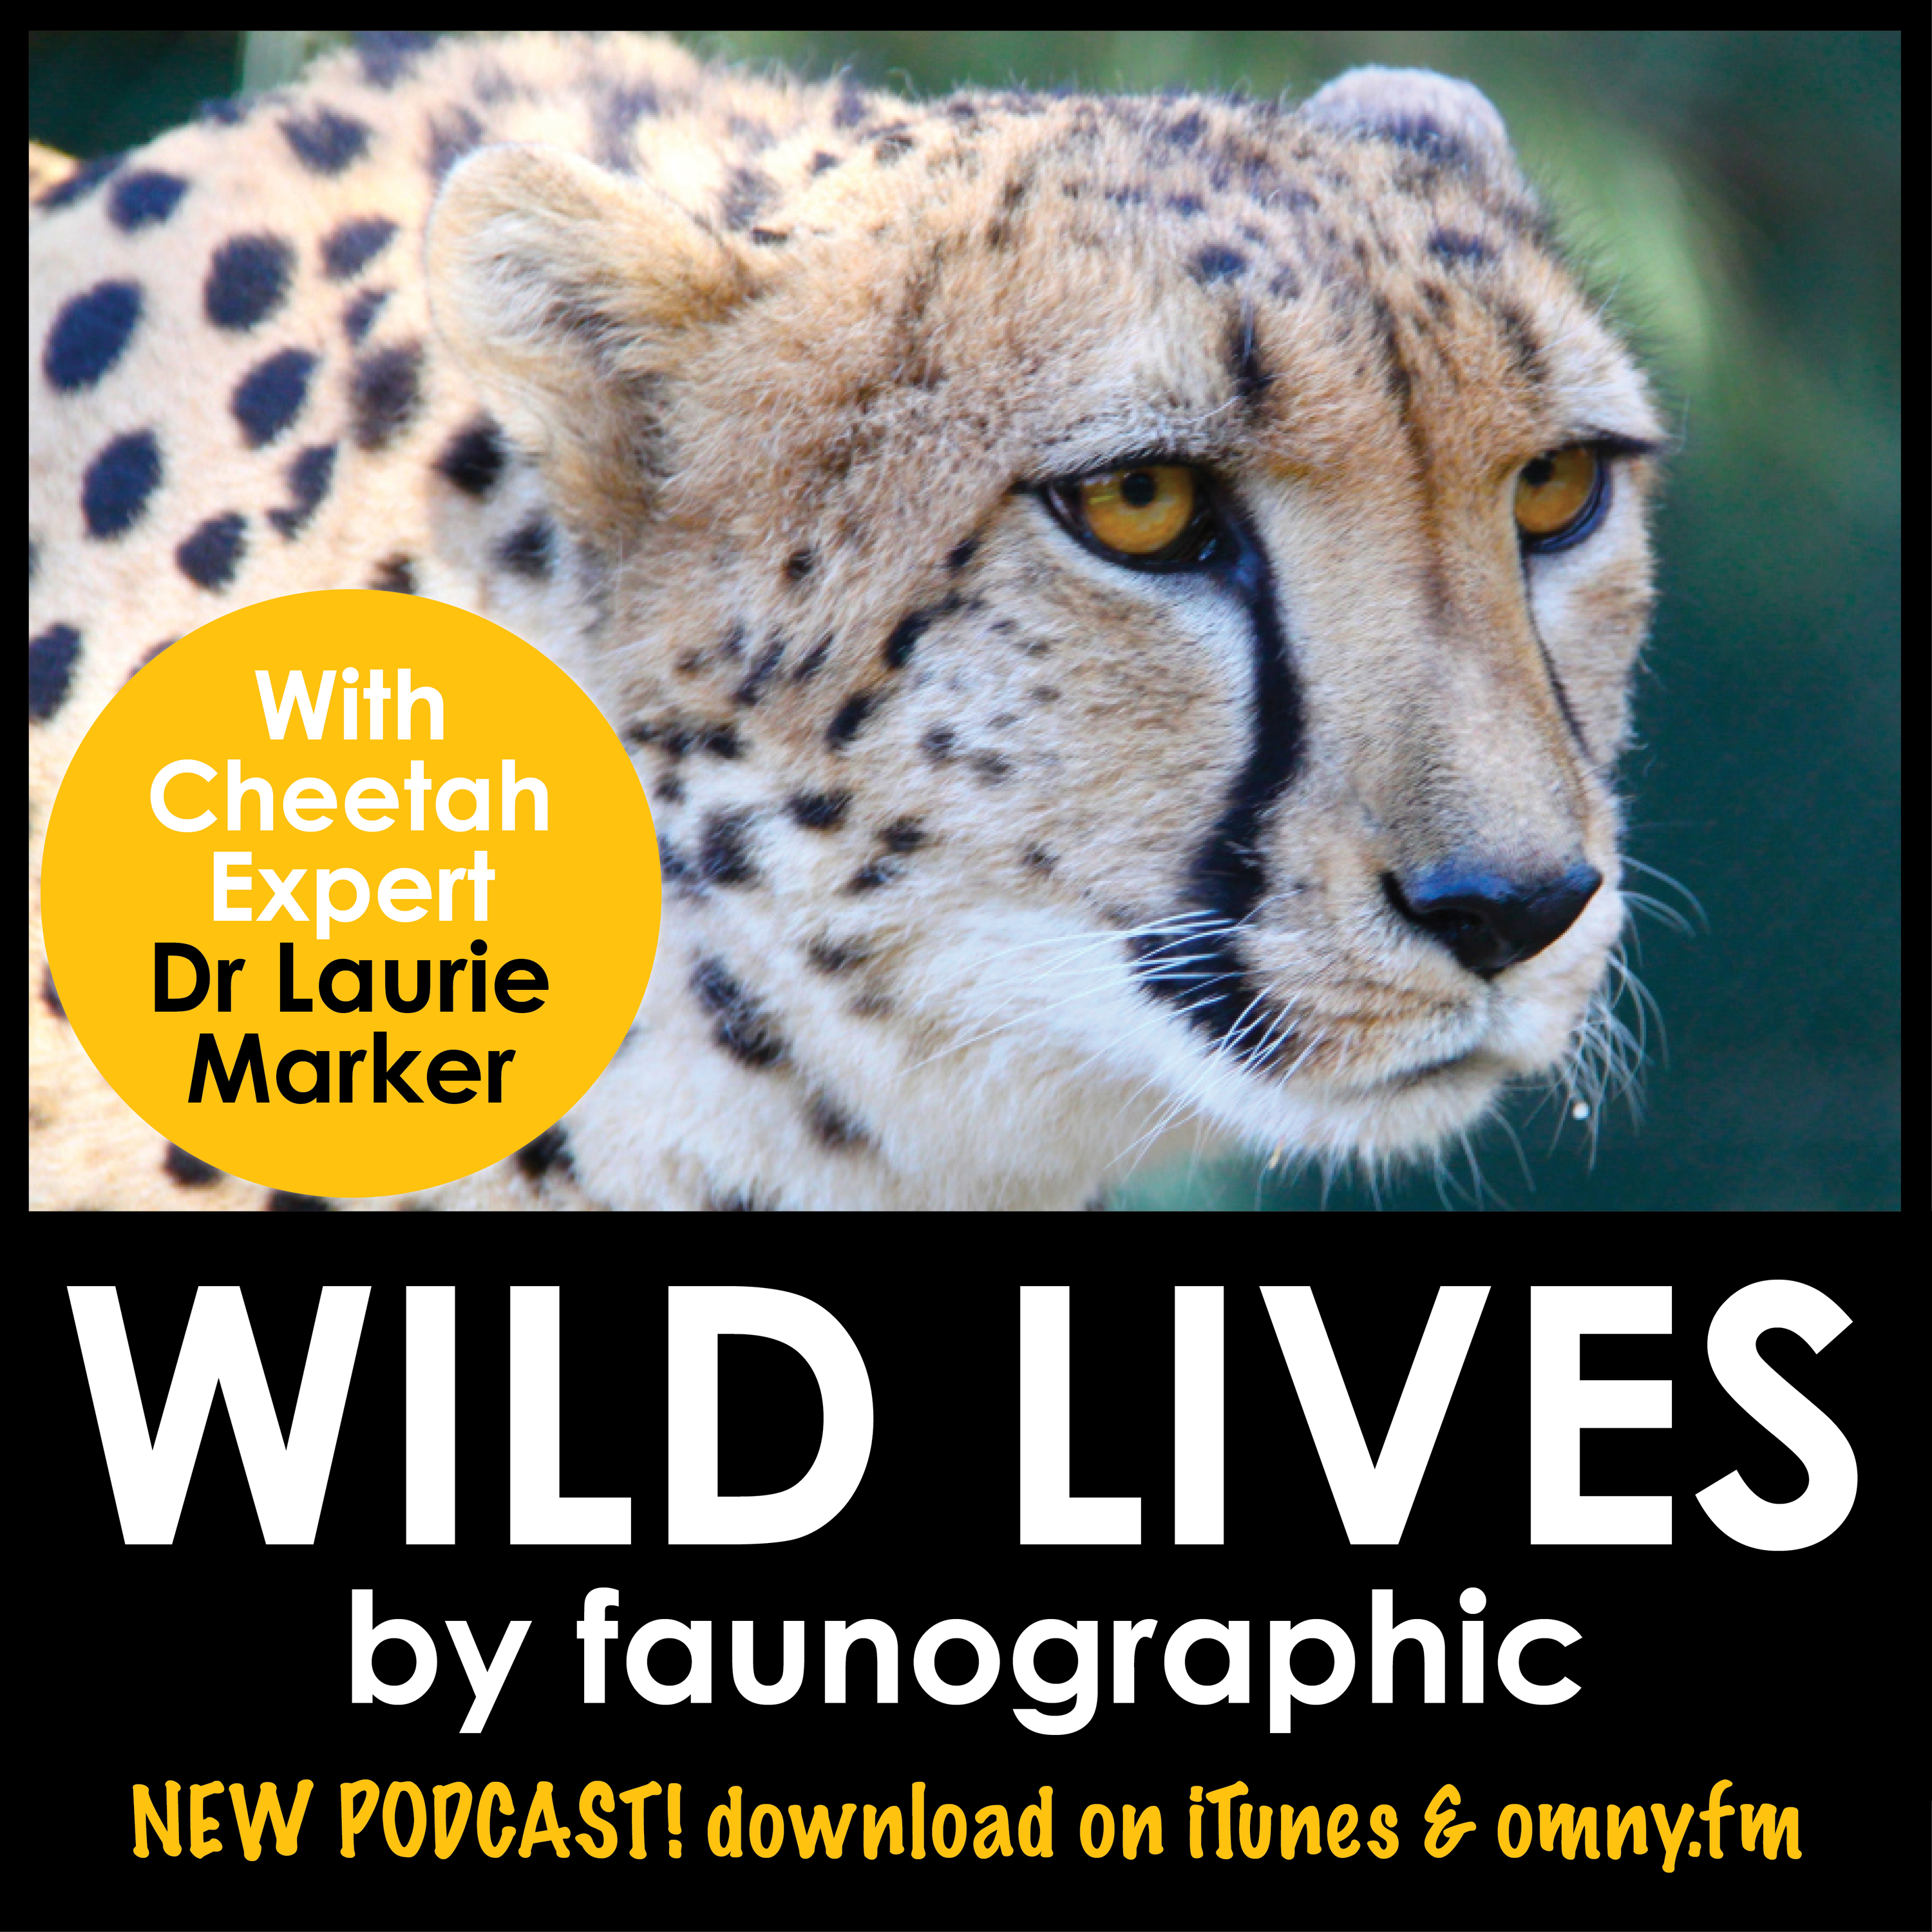 Cheetahs with legendary Big Cat expert Dr Laurie Marker